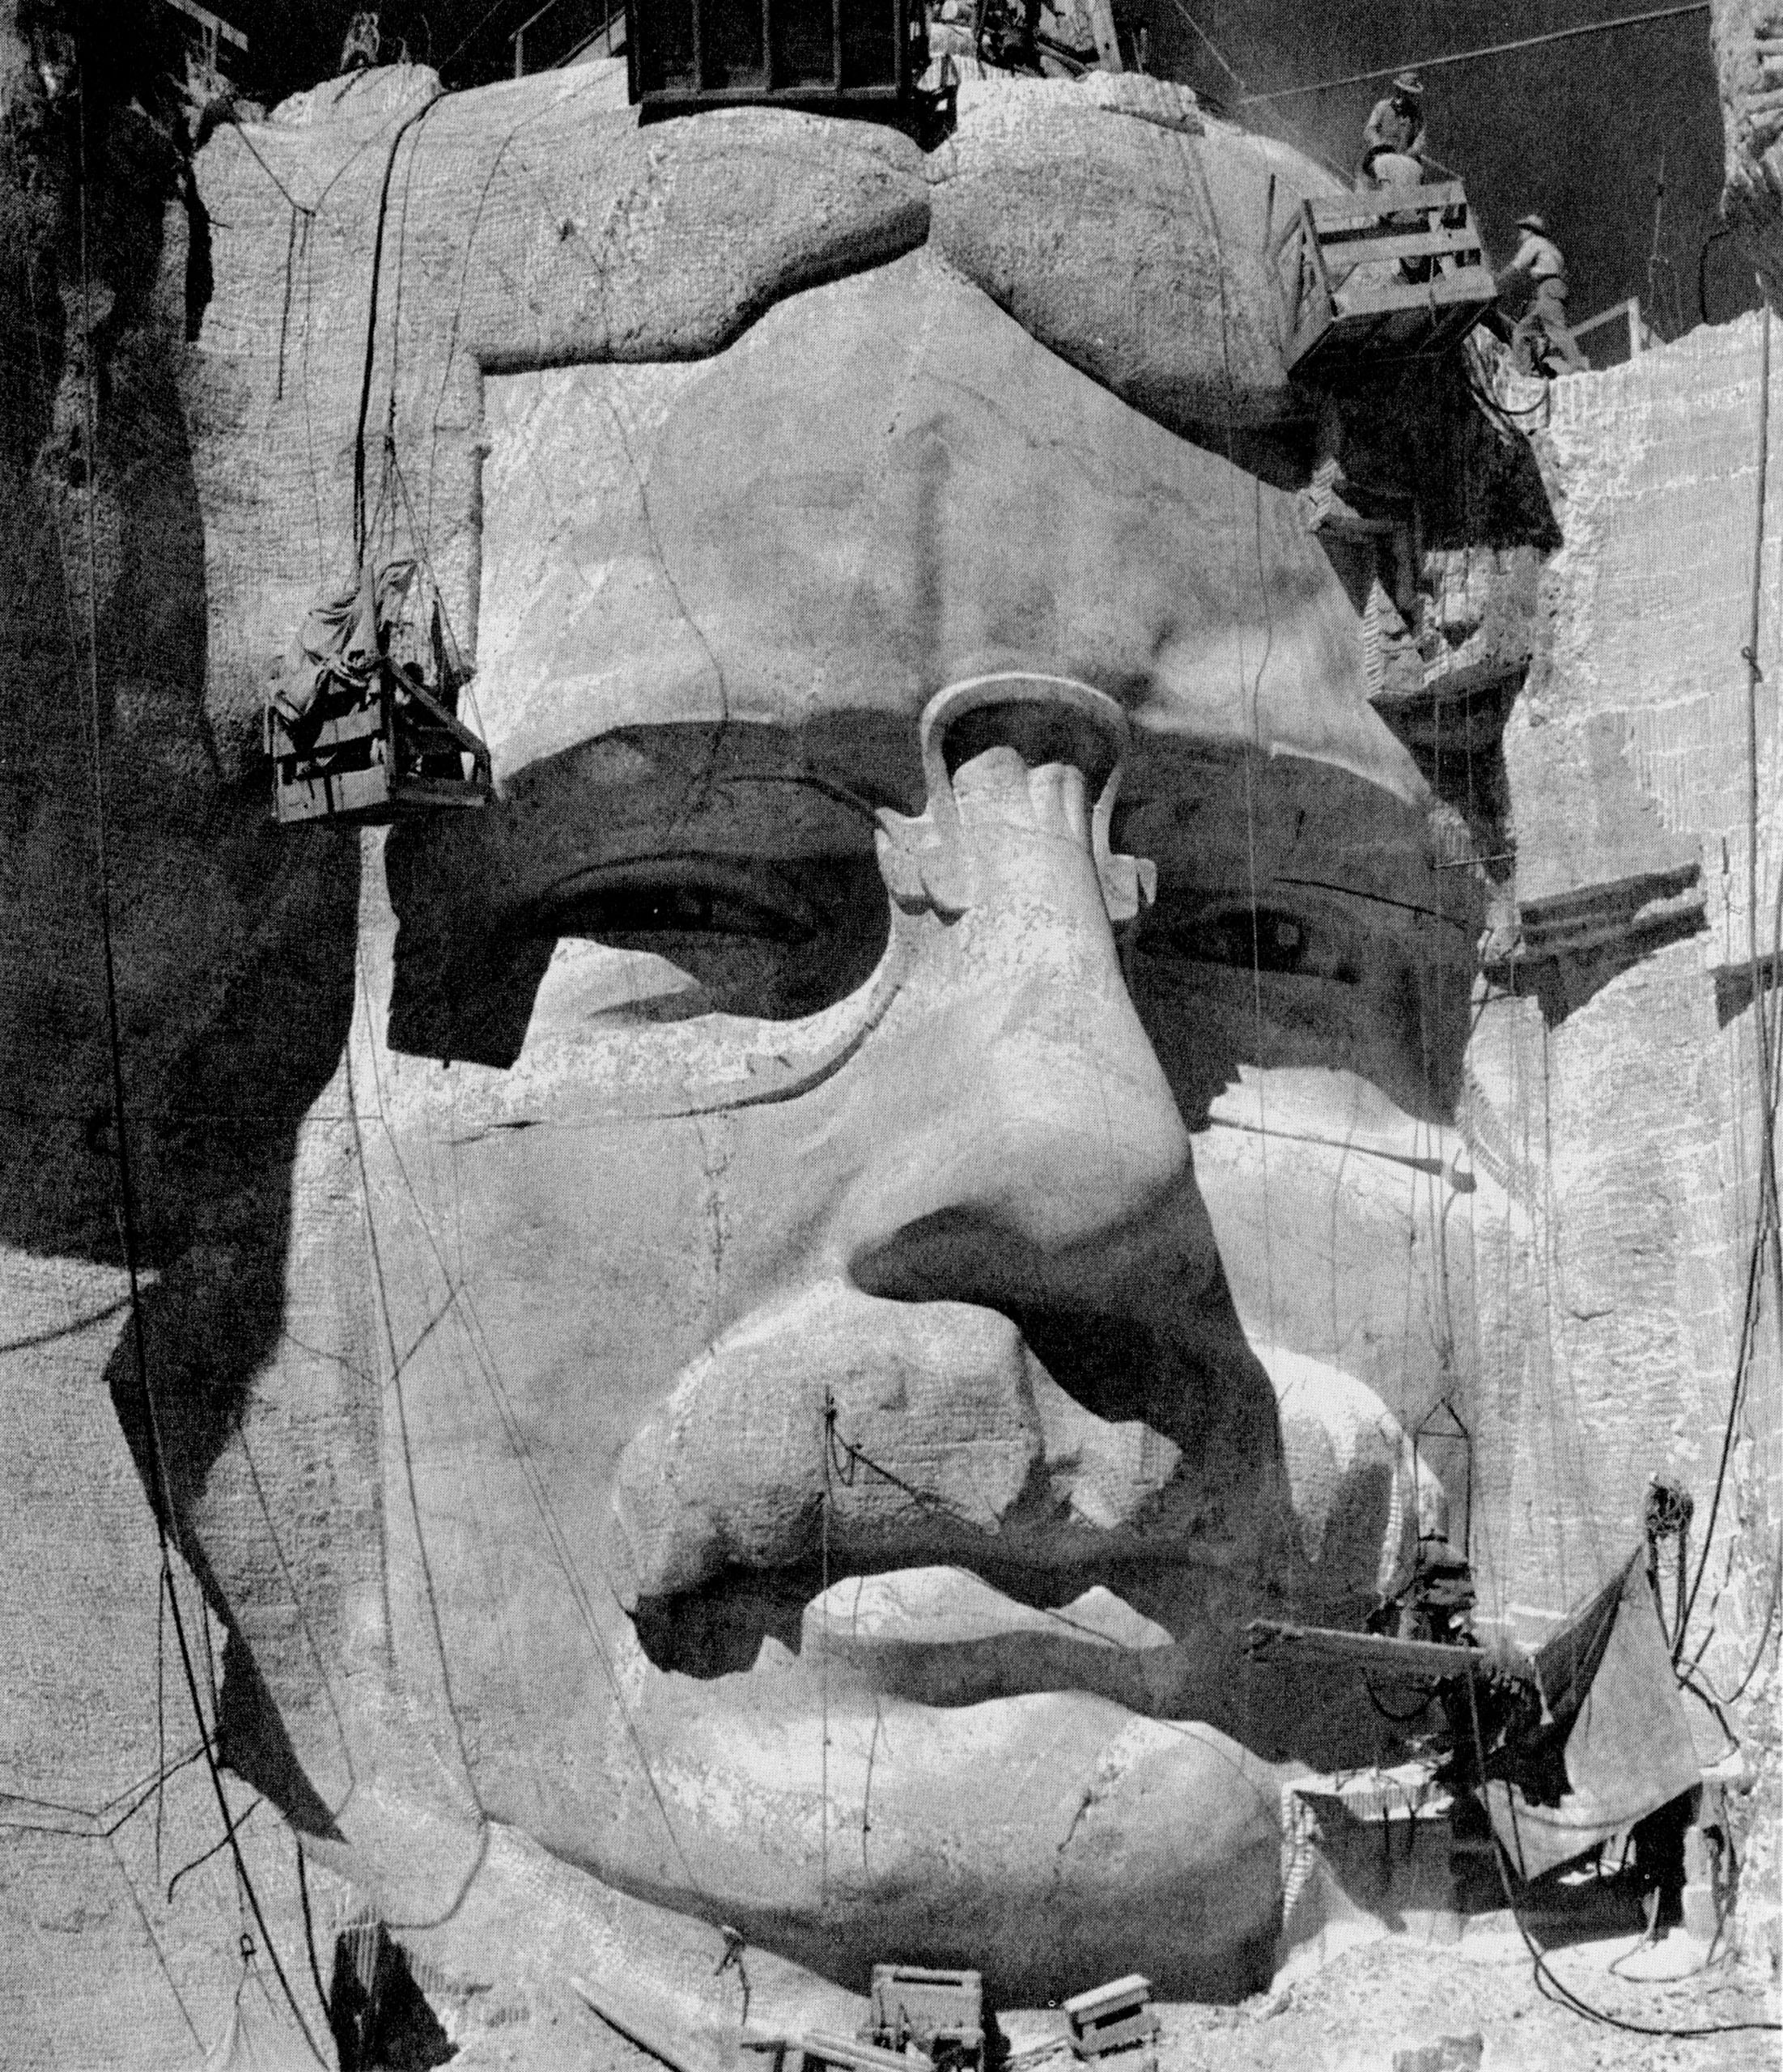 The head of Theodore Roosevelt under construction, c. 1930s.